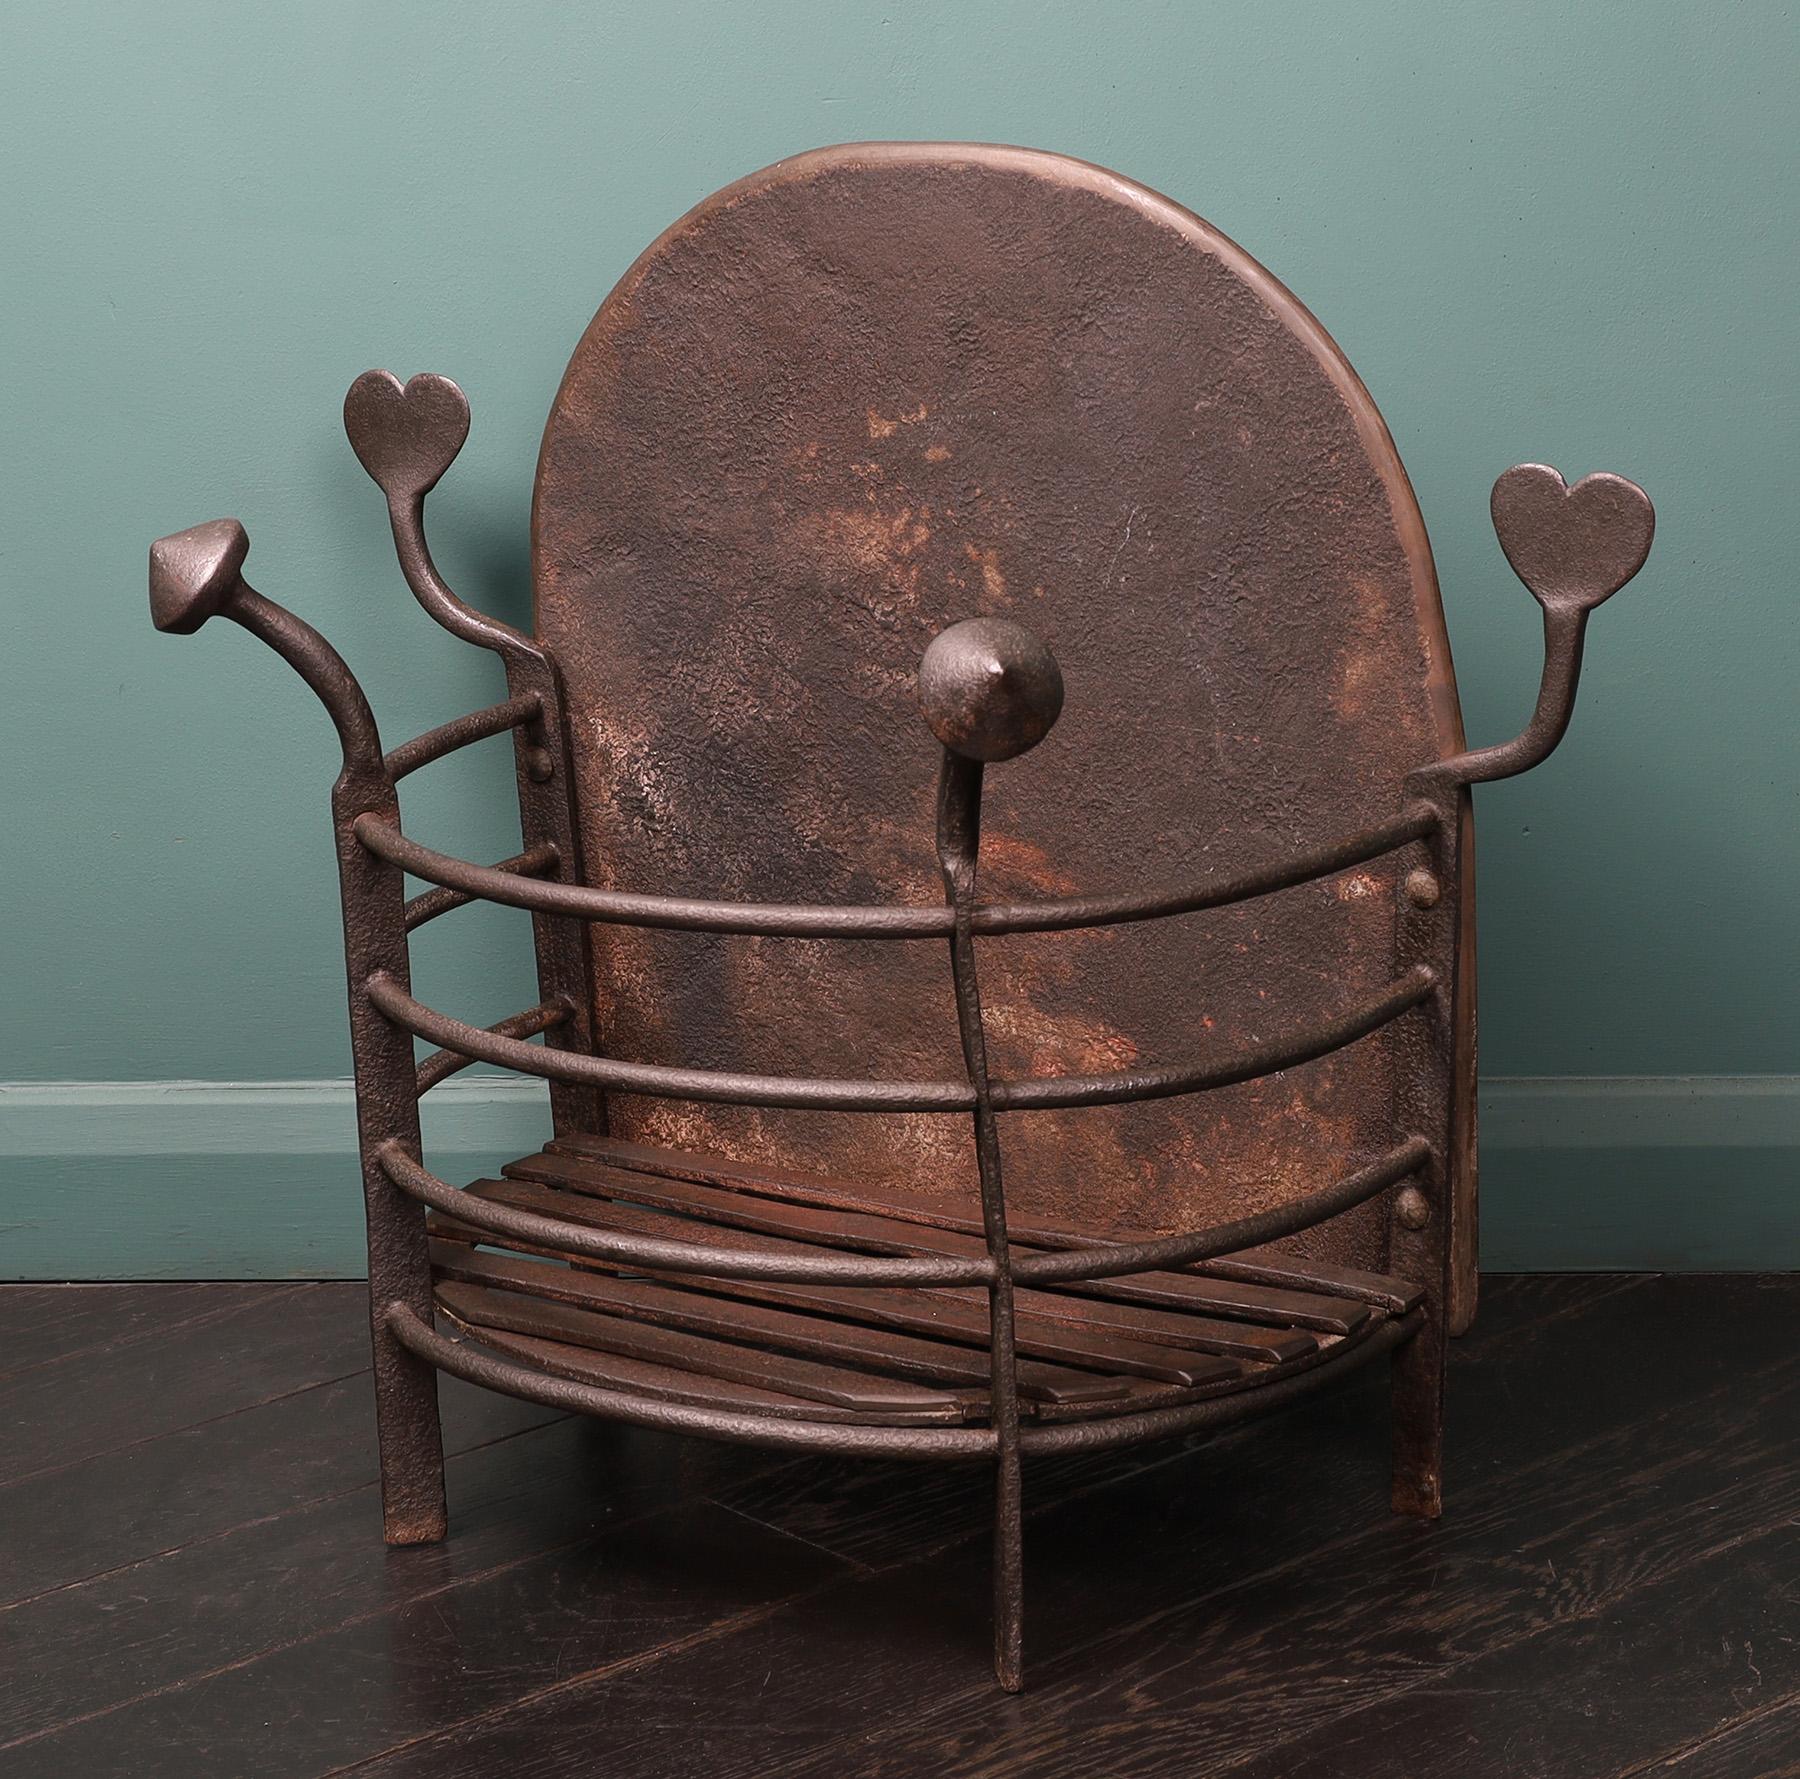 Other An Arts & Crafts Semi-Circular Wrought Fire Basket with Heart-Shaped finials For Sale